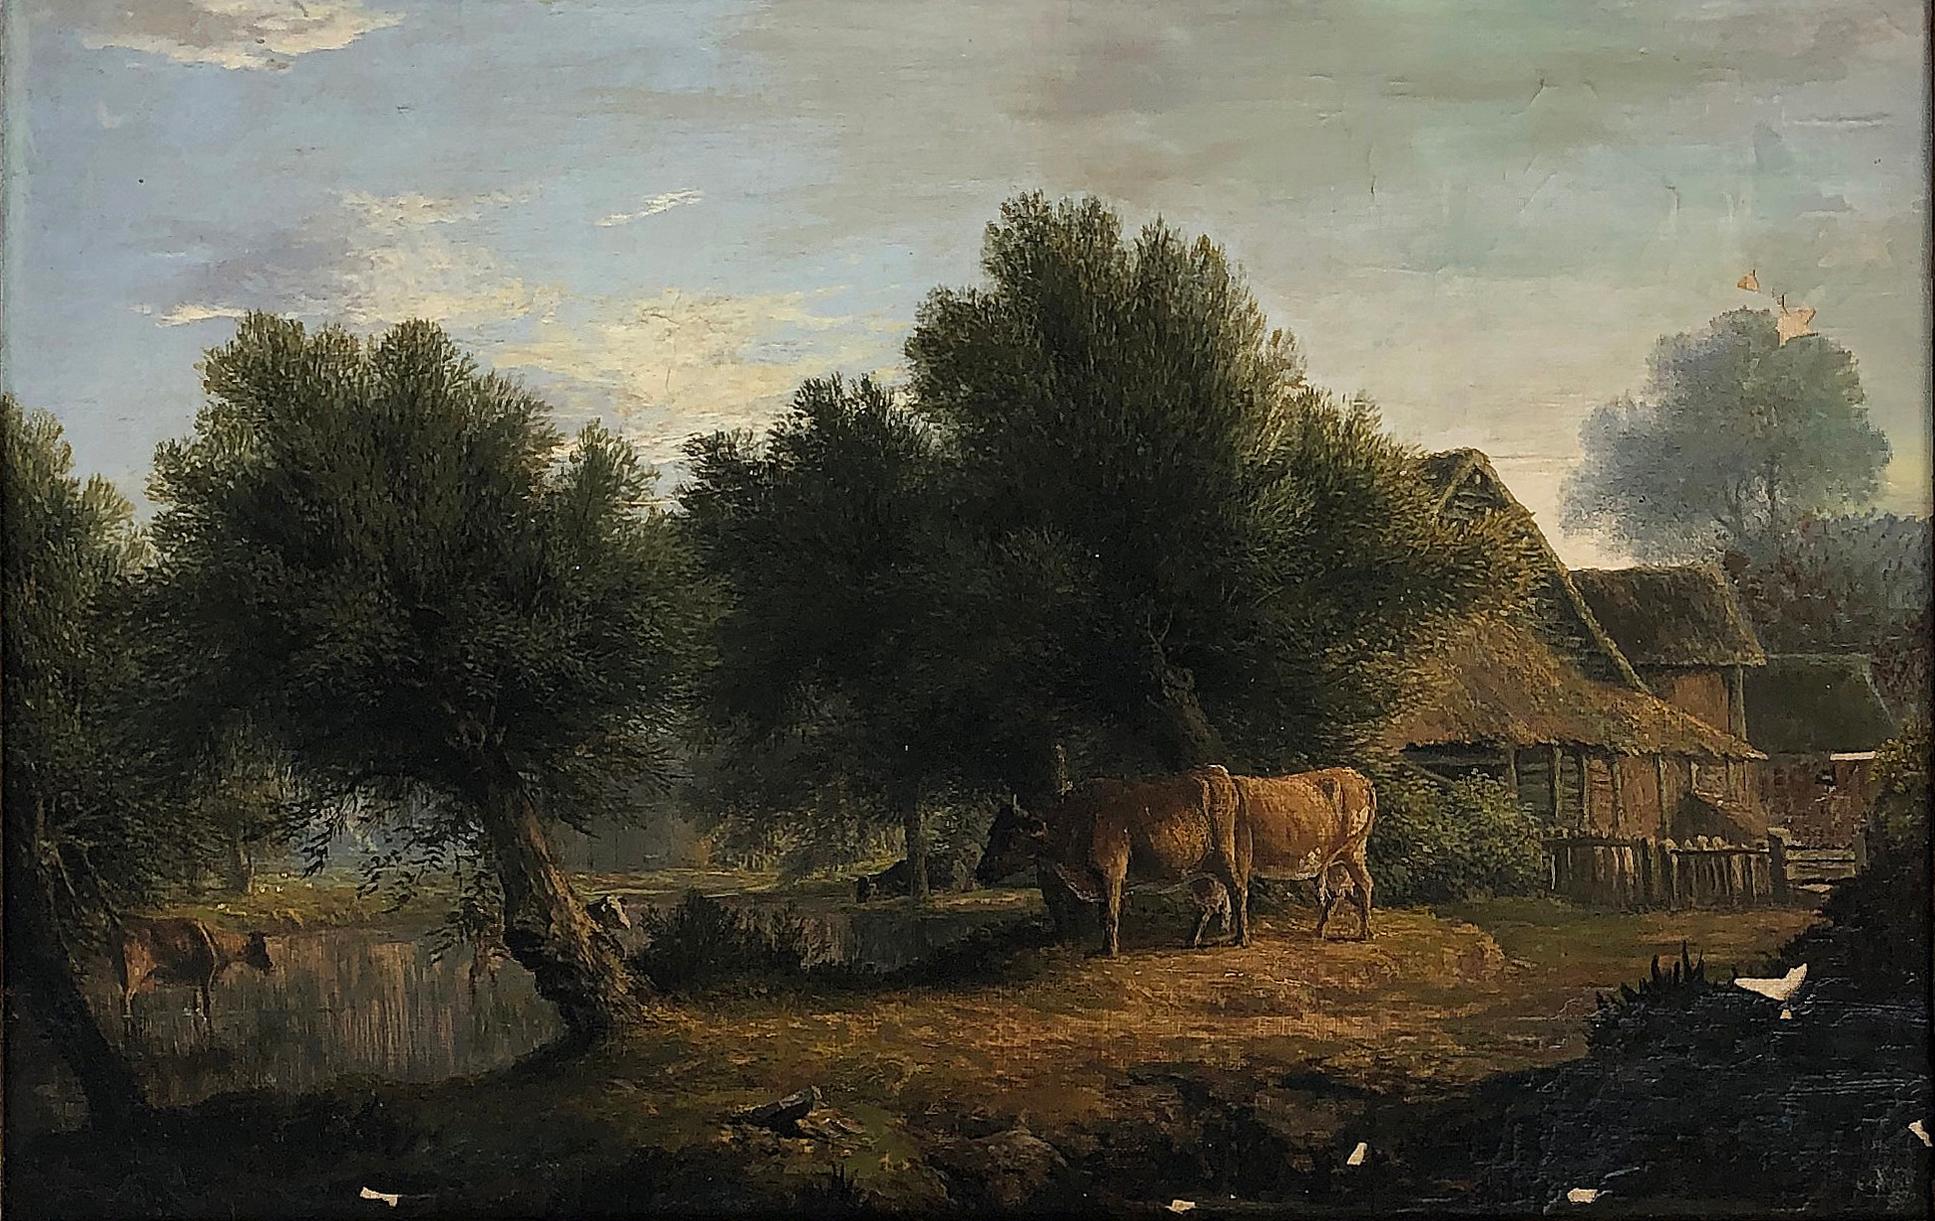 19th century oil painting by Artist James Stark (1794-1859)

Offered is a 19th-century pastoral oil painting on canvas depicting cows in the countryside. The painting is signed on verso and retains an auction house lot number. The painting is